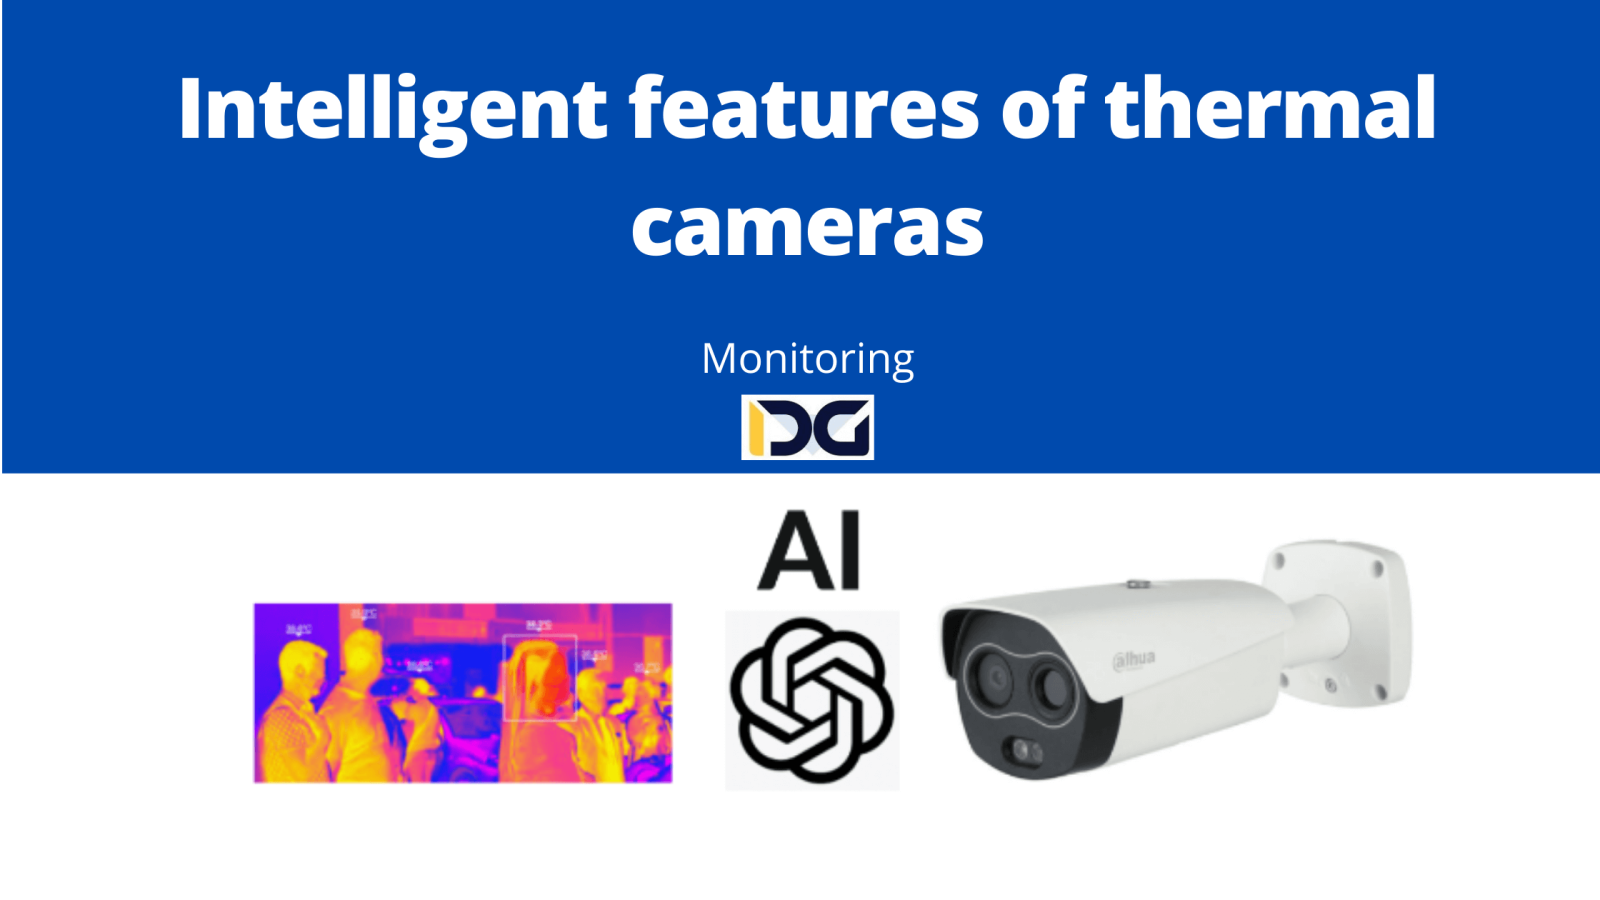 Intelligent features of thermal cameras